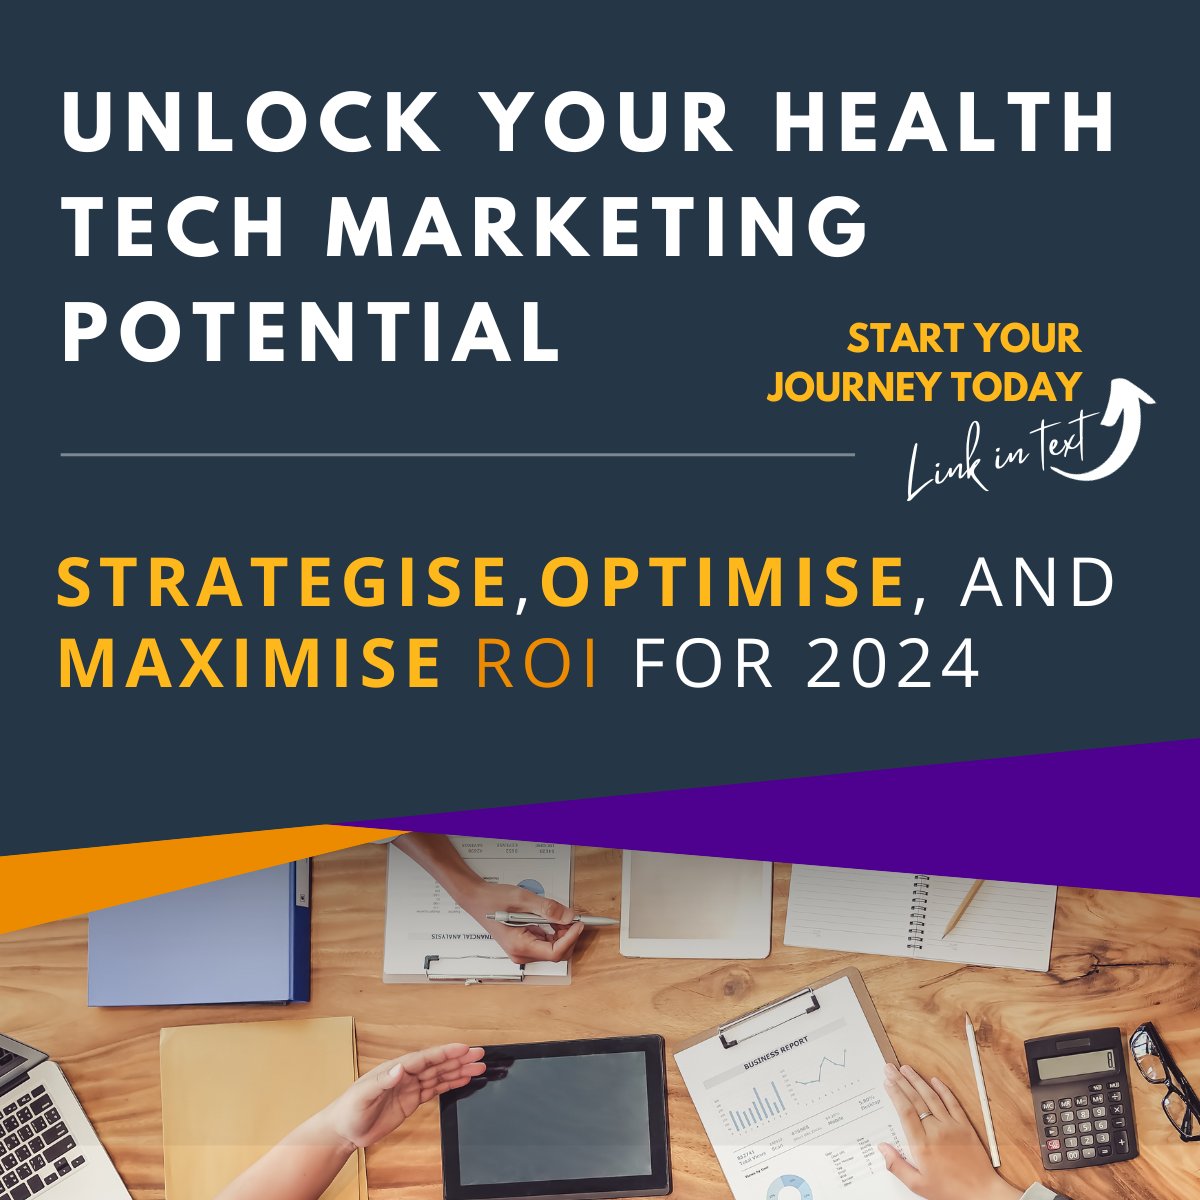 🚀 Ready to elevate your health tech marketing for 2024? It's time to strategise, optimise, and maximise your ROI! Let's cut through the noise together and get your innovation the attention it deserves. bit.ly/2024-health-te… #HealthTechMarketing #Innovation #ROI #NHS